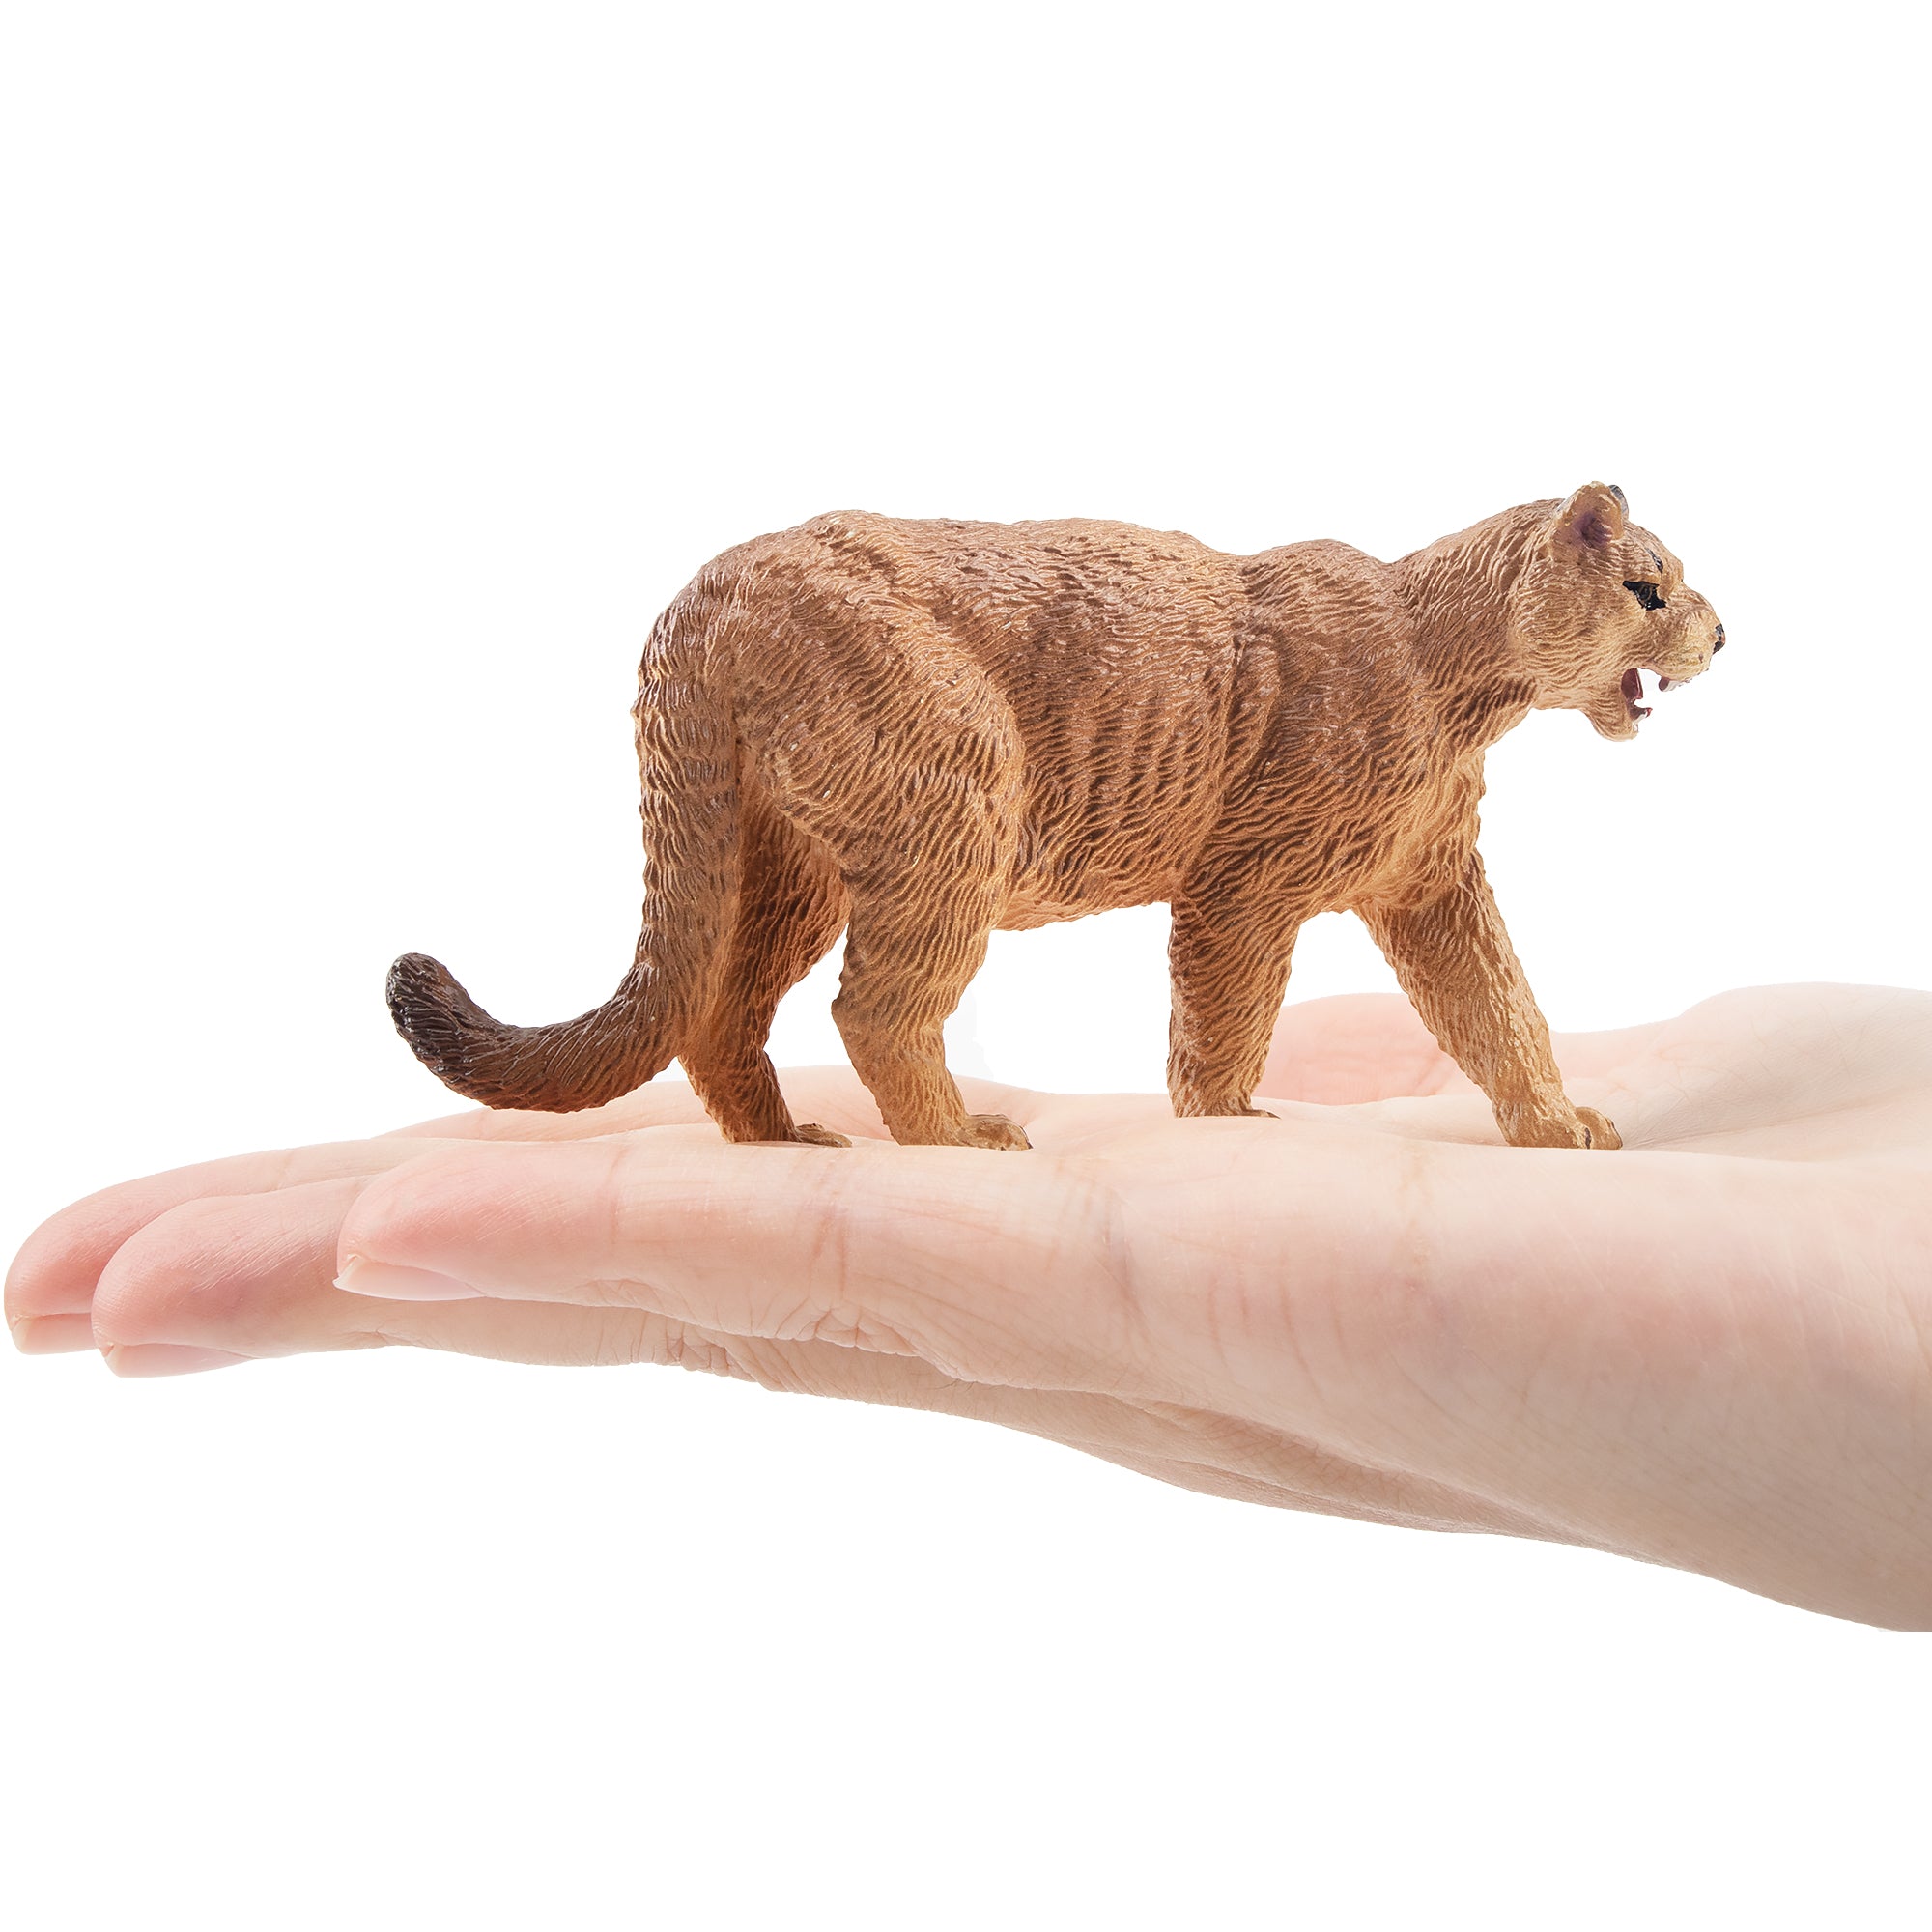 Toymany Cougar Figurine Toy-on hand